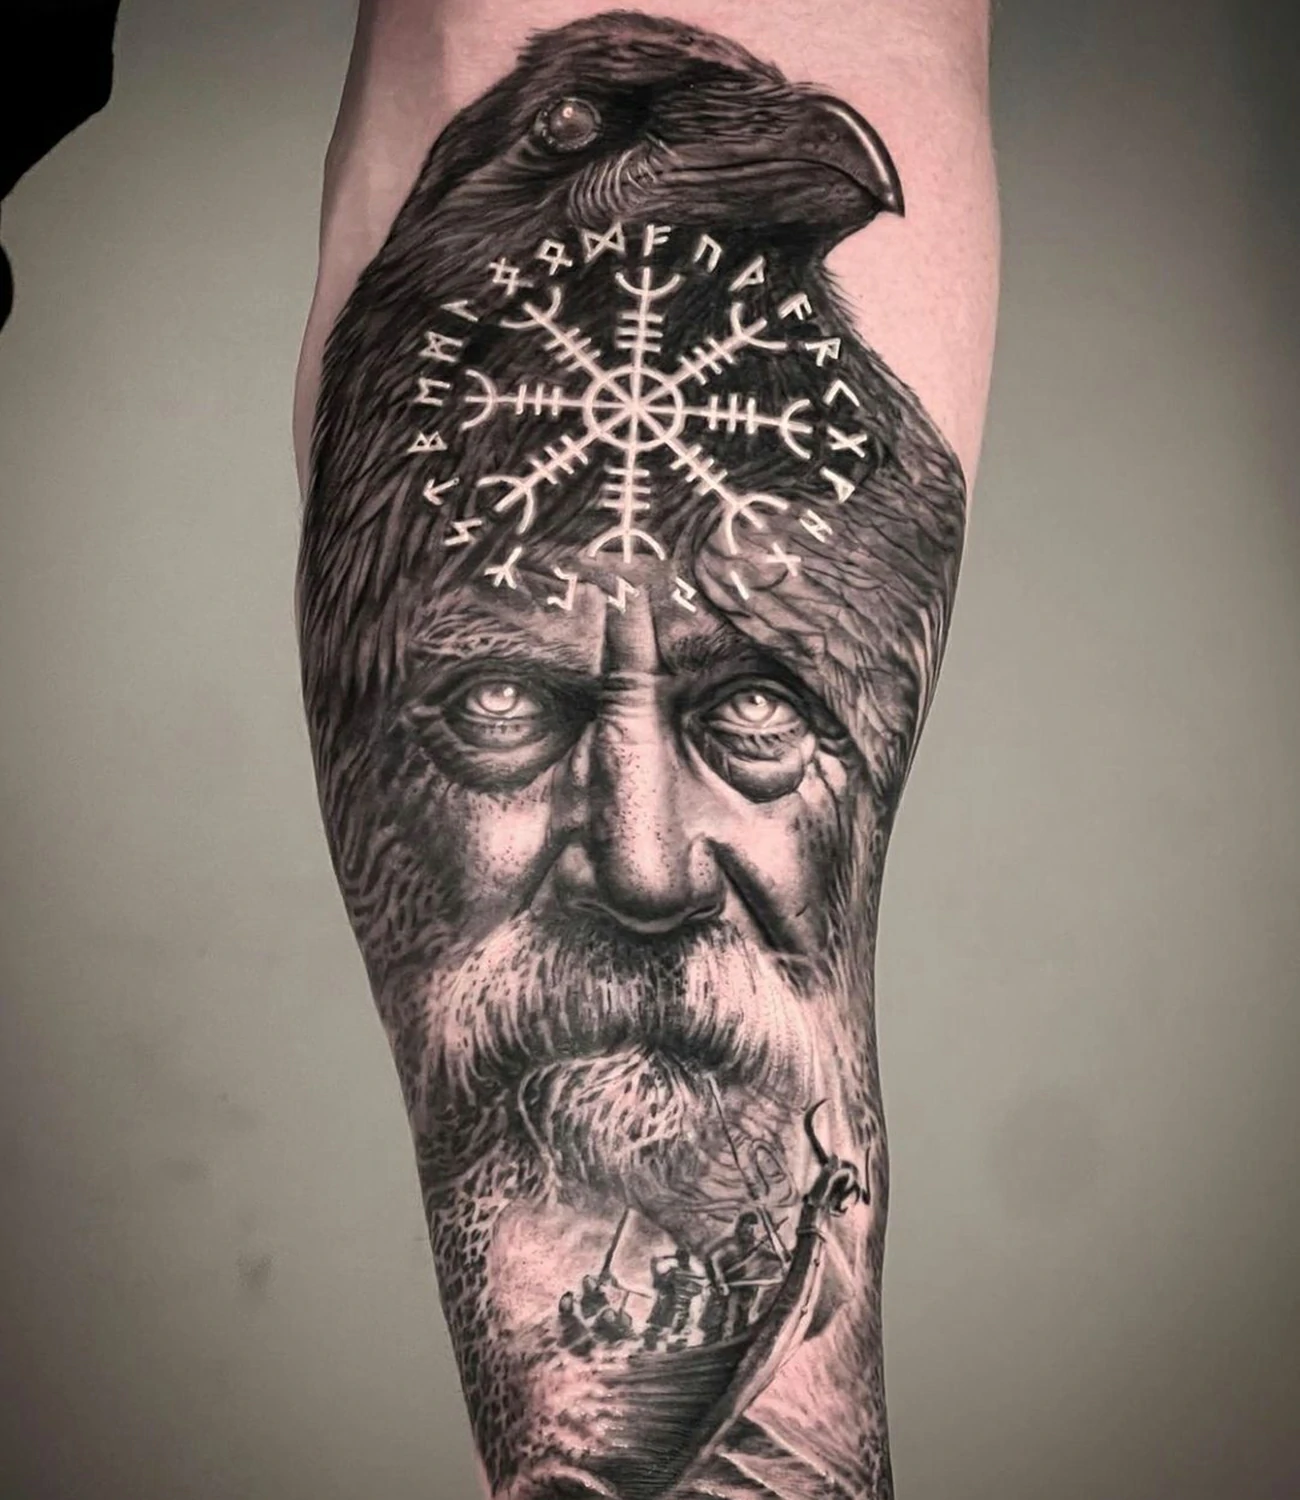 Raven odin tattoo: A tattoo that pairs a raven with Odin, the Norse god.